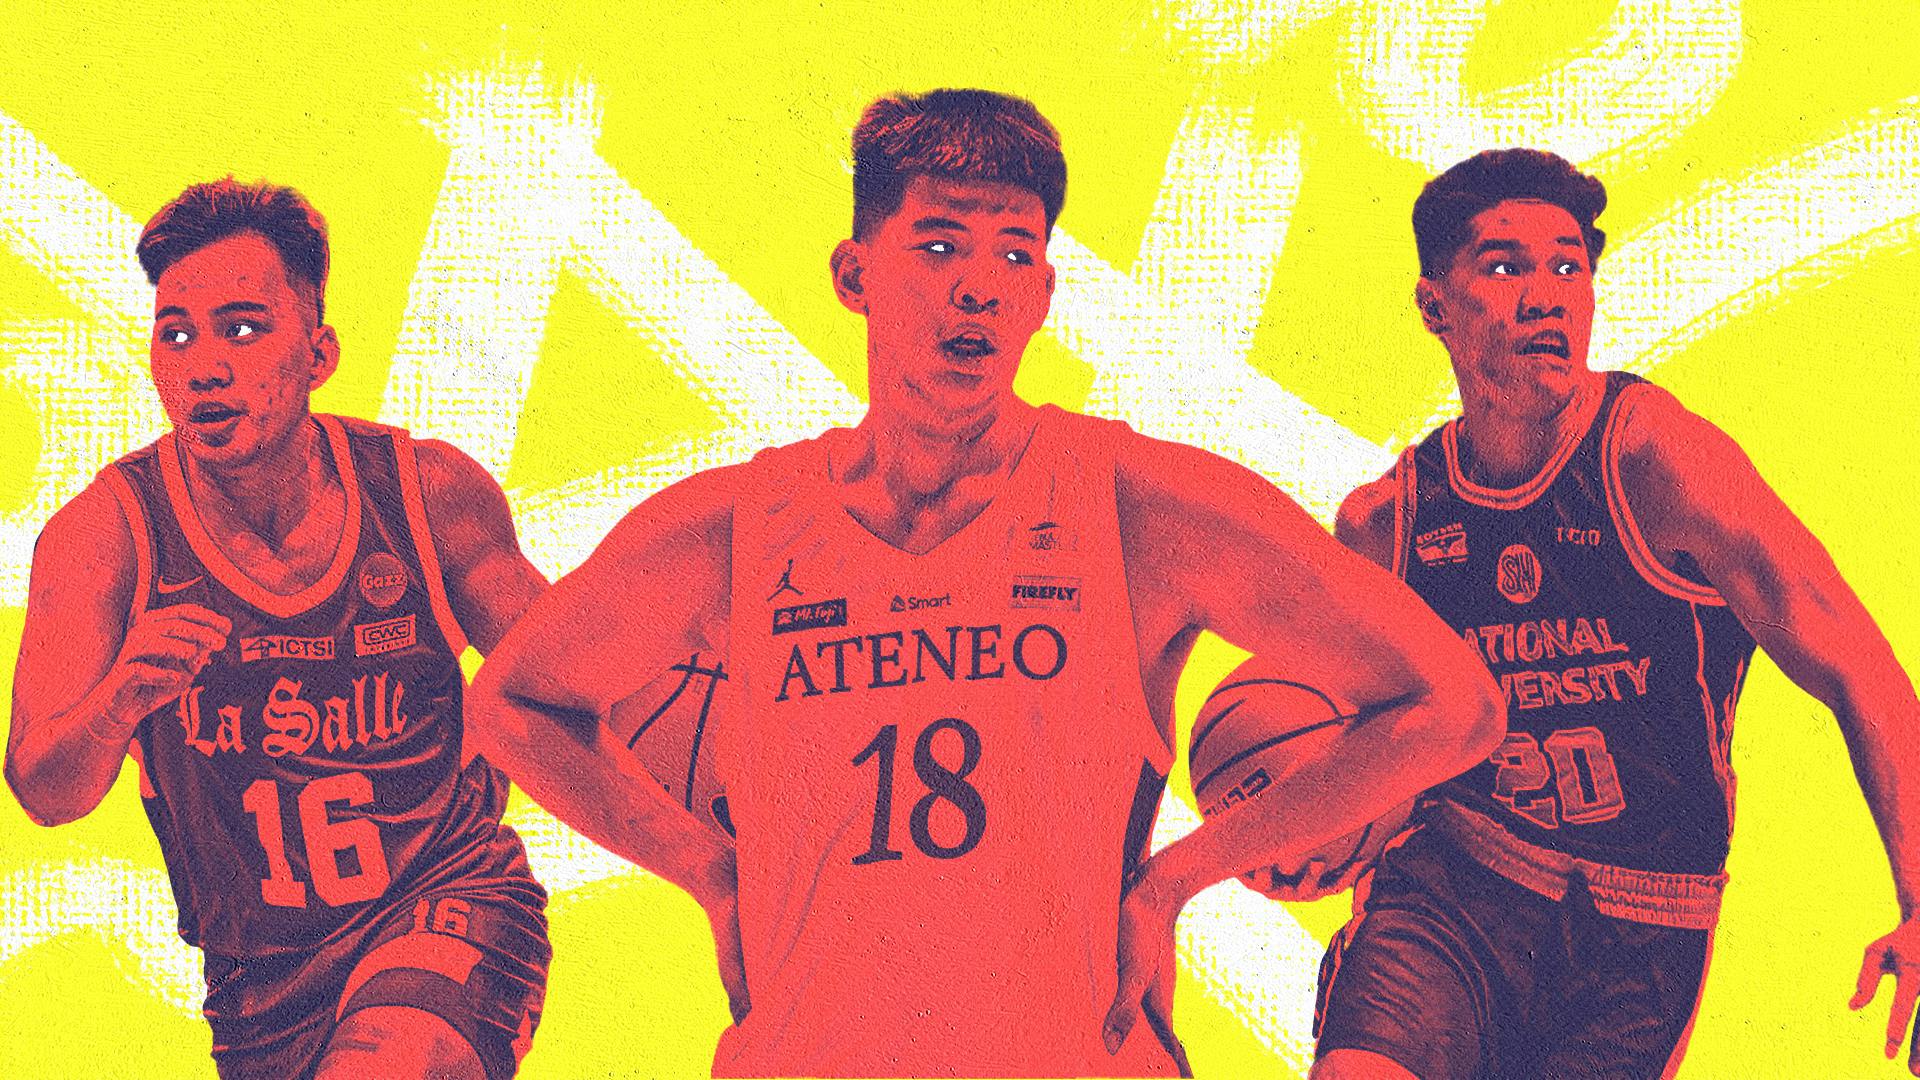 Time to shine: 5 potential breakout players in UAAP Season 86